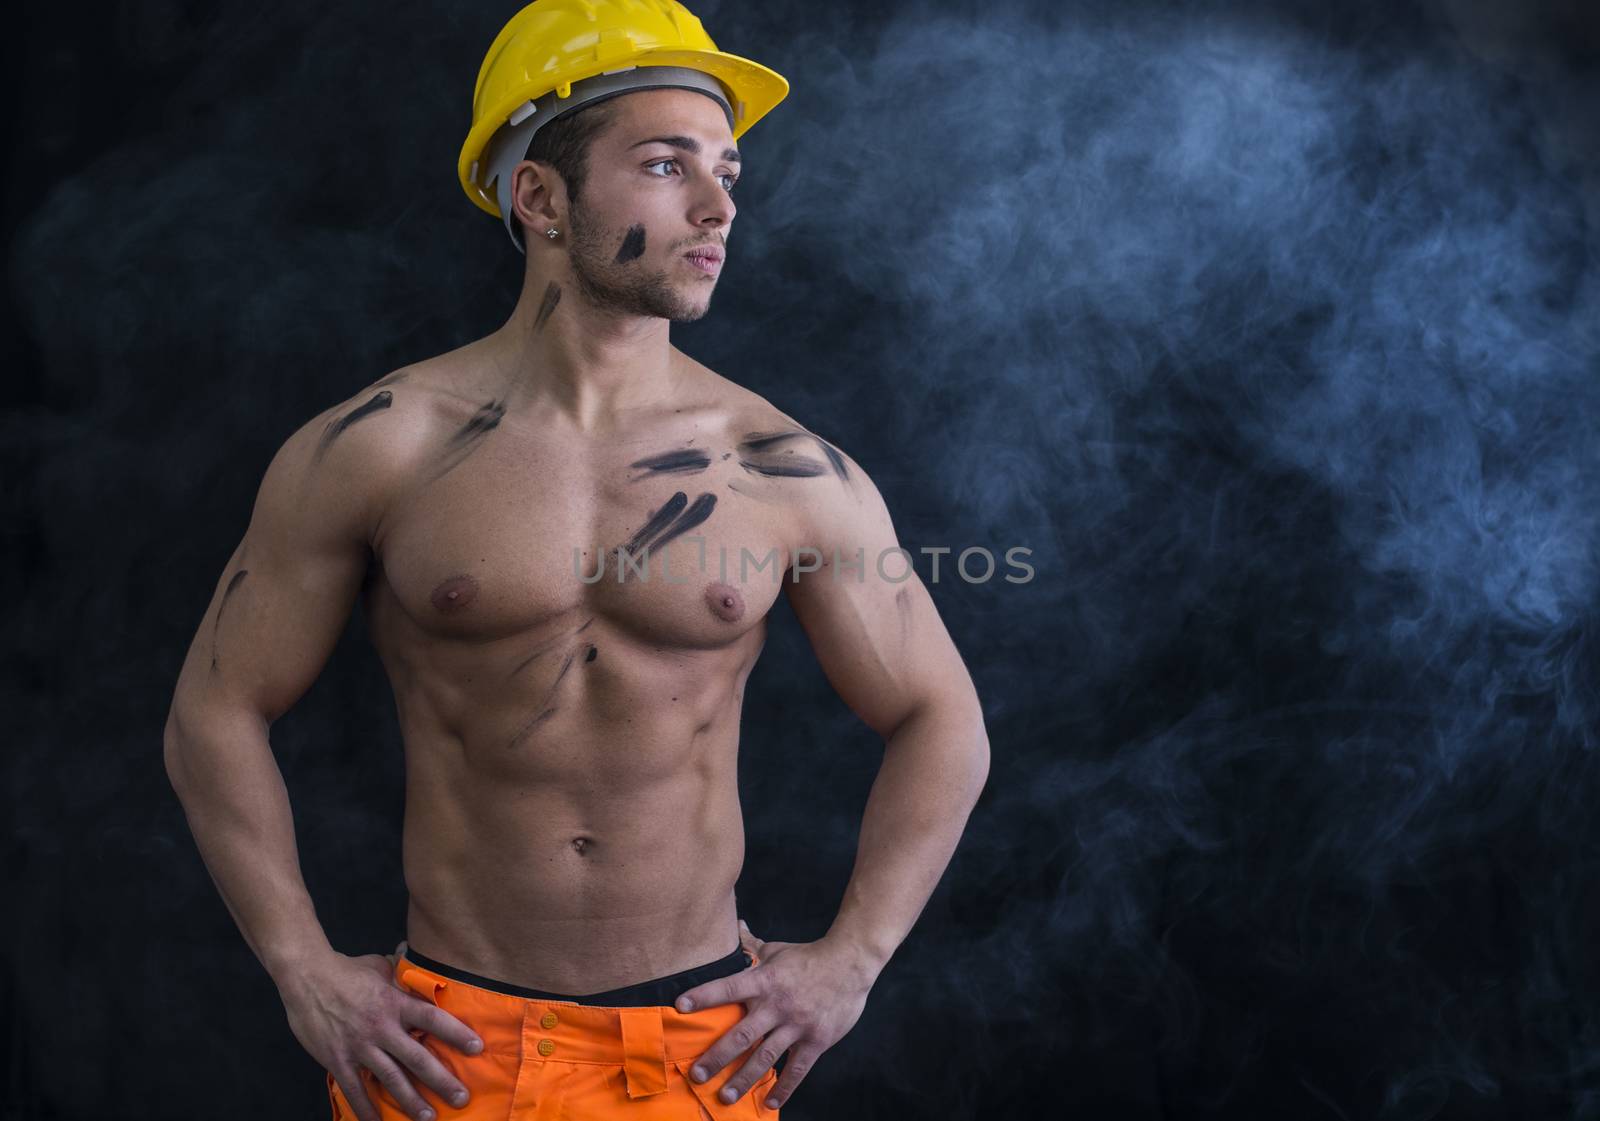 Muscular young construction worker shirtless wearing hardhat, dark background with smoke